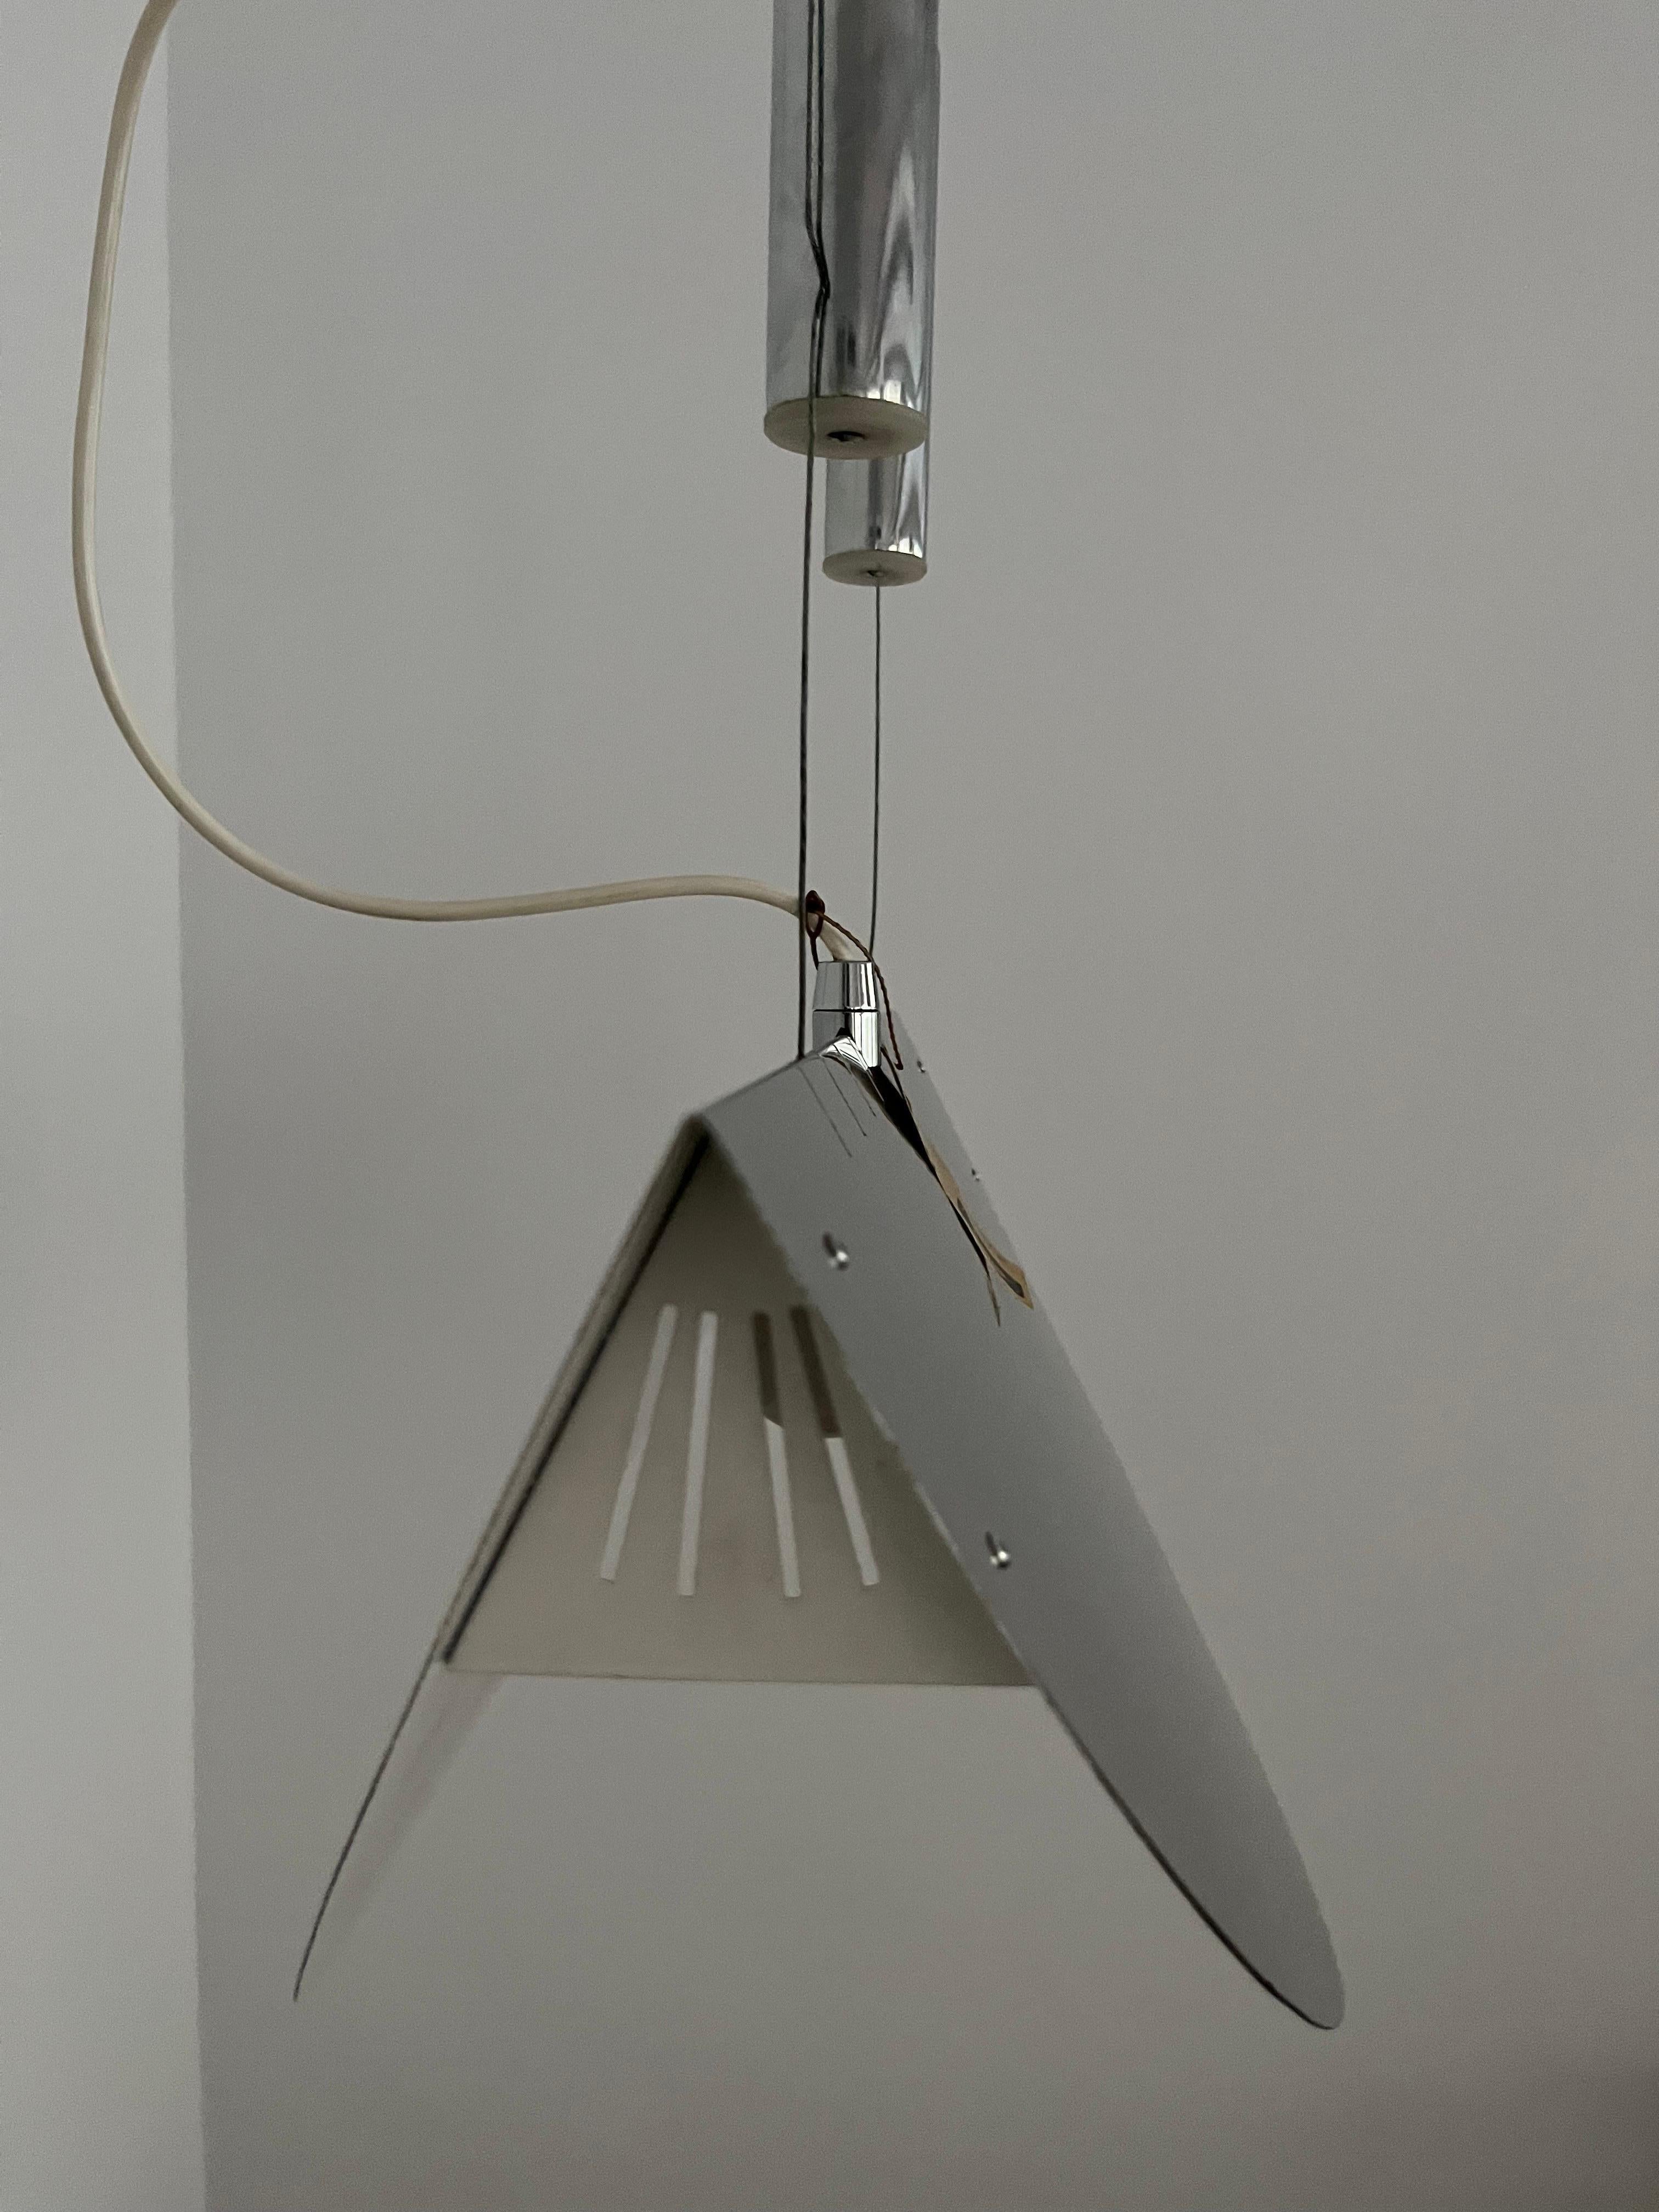 Exceptional Mid-Century Counterweight Chandelier by Estiluz, Barcelona, 1977s For Sale 9